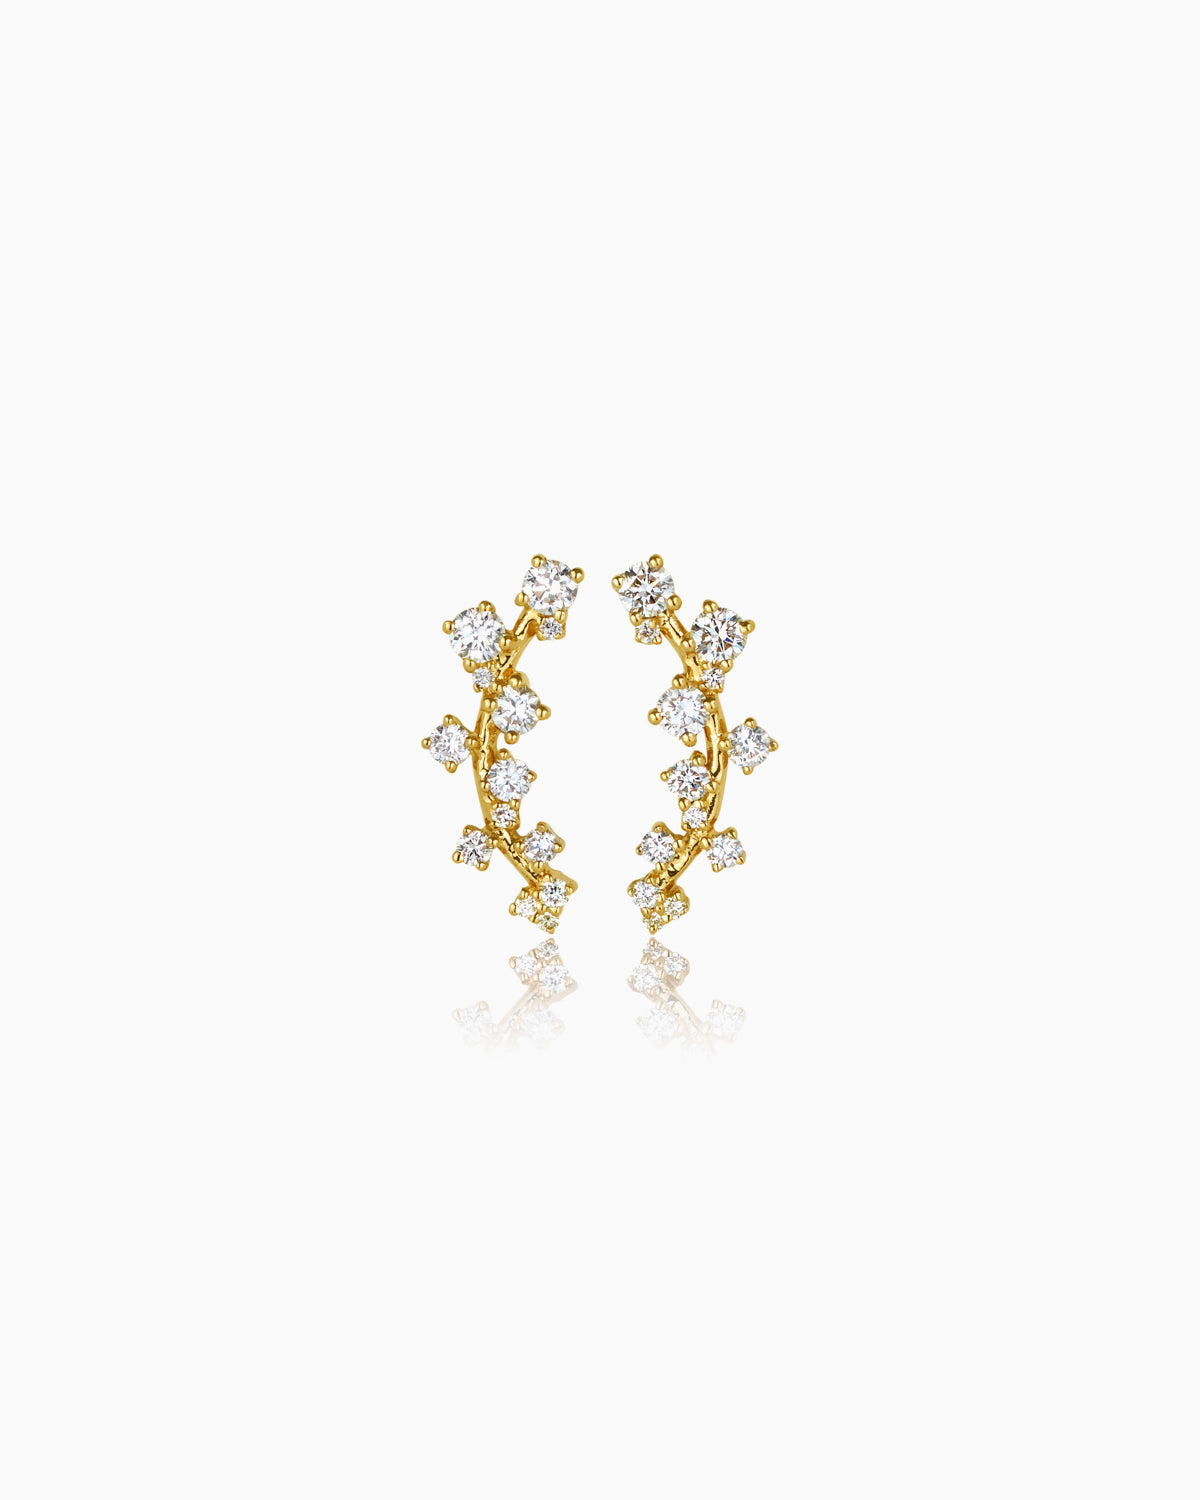 Starburst Diamond Ear Climber, crafted in luxurious 18k yellow gold